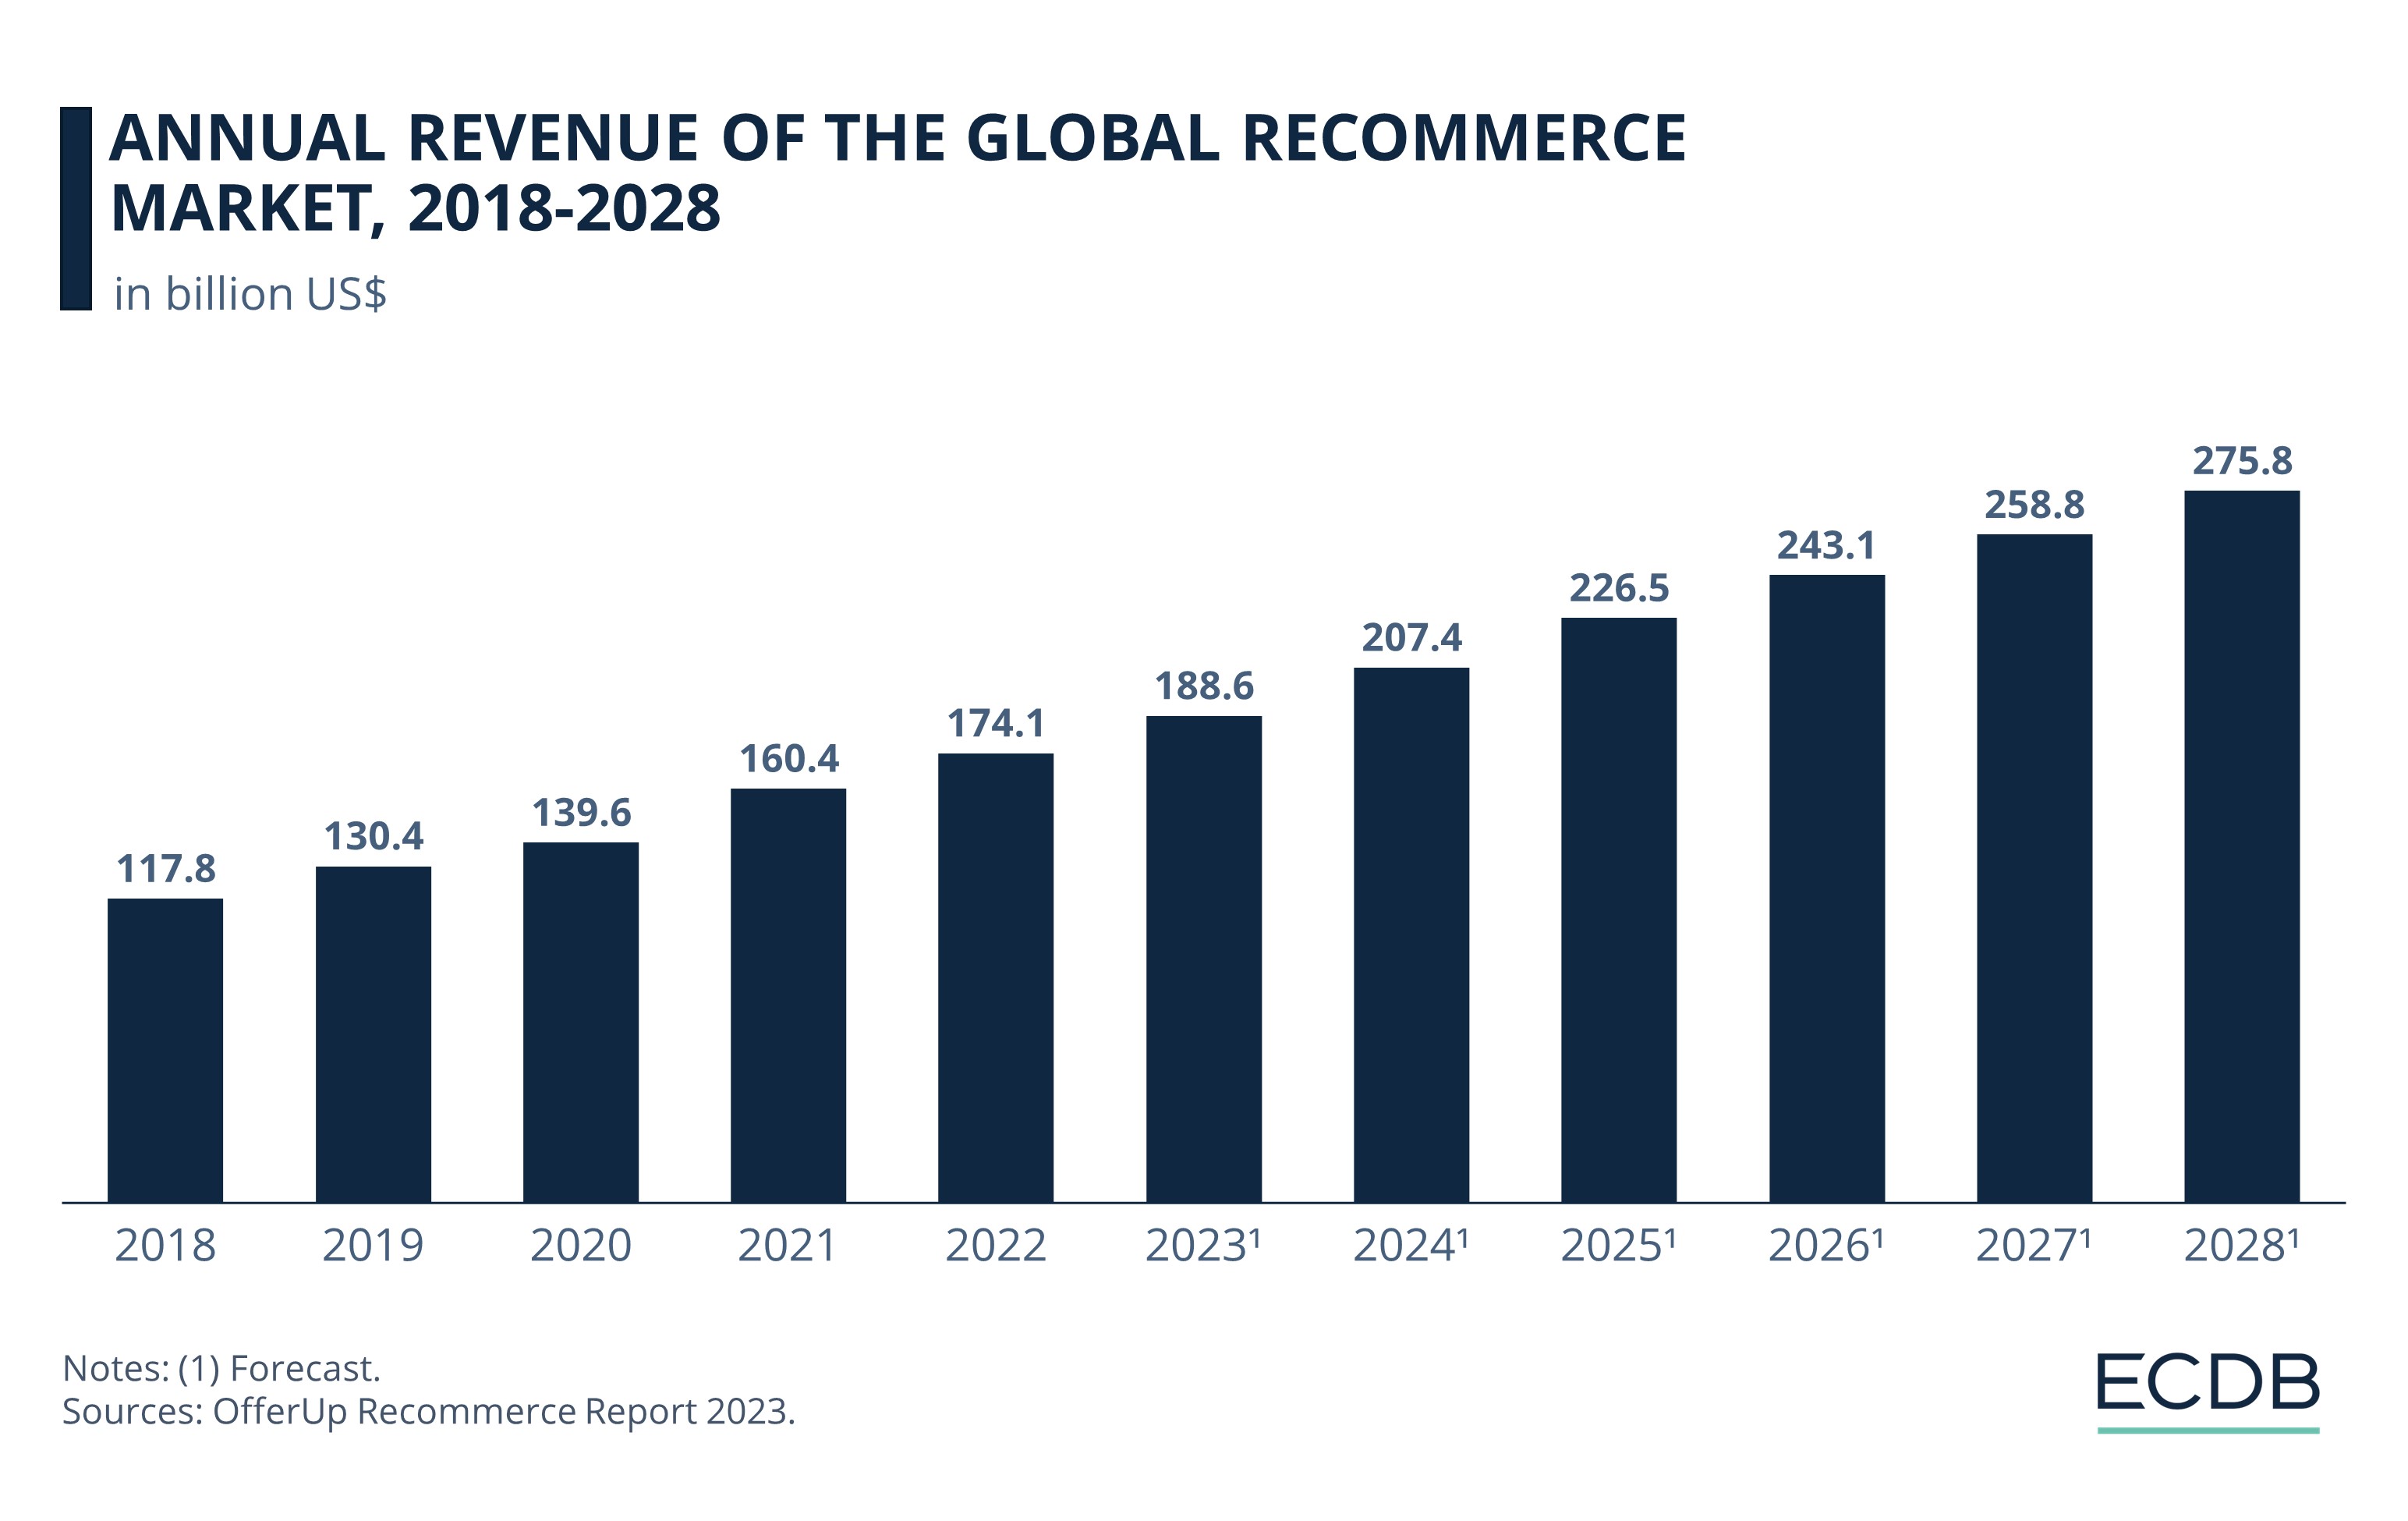 Annual Revenue of the Global Recommerce Market, 2018-2028